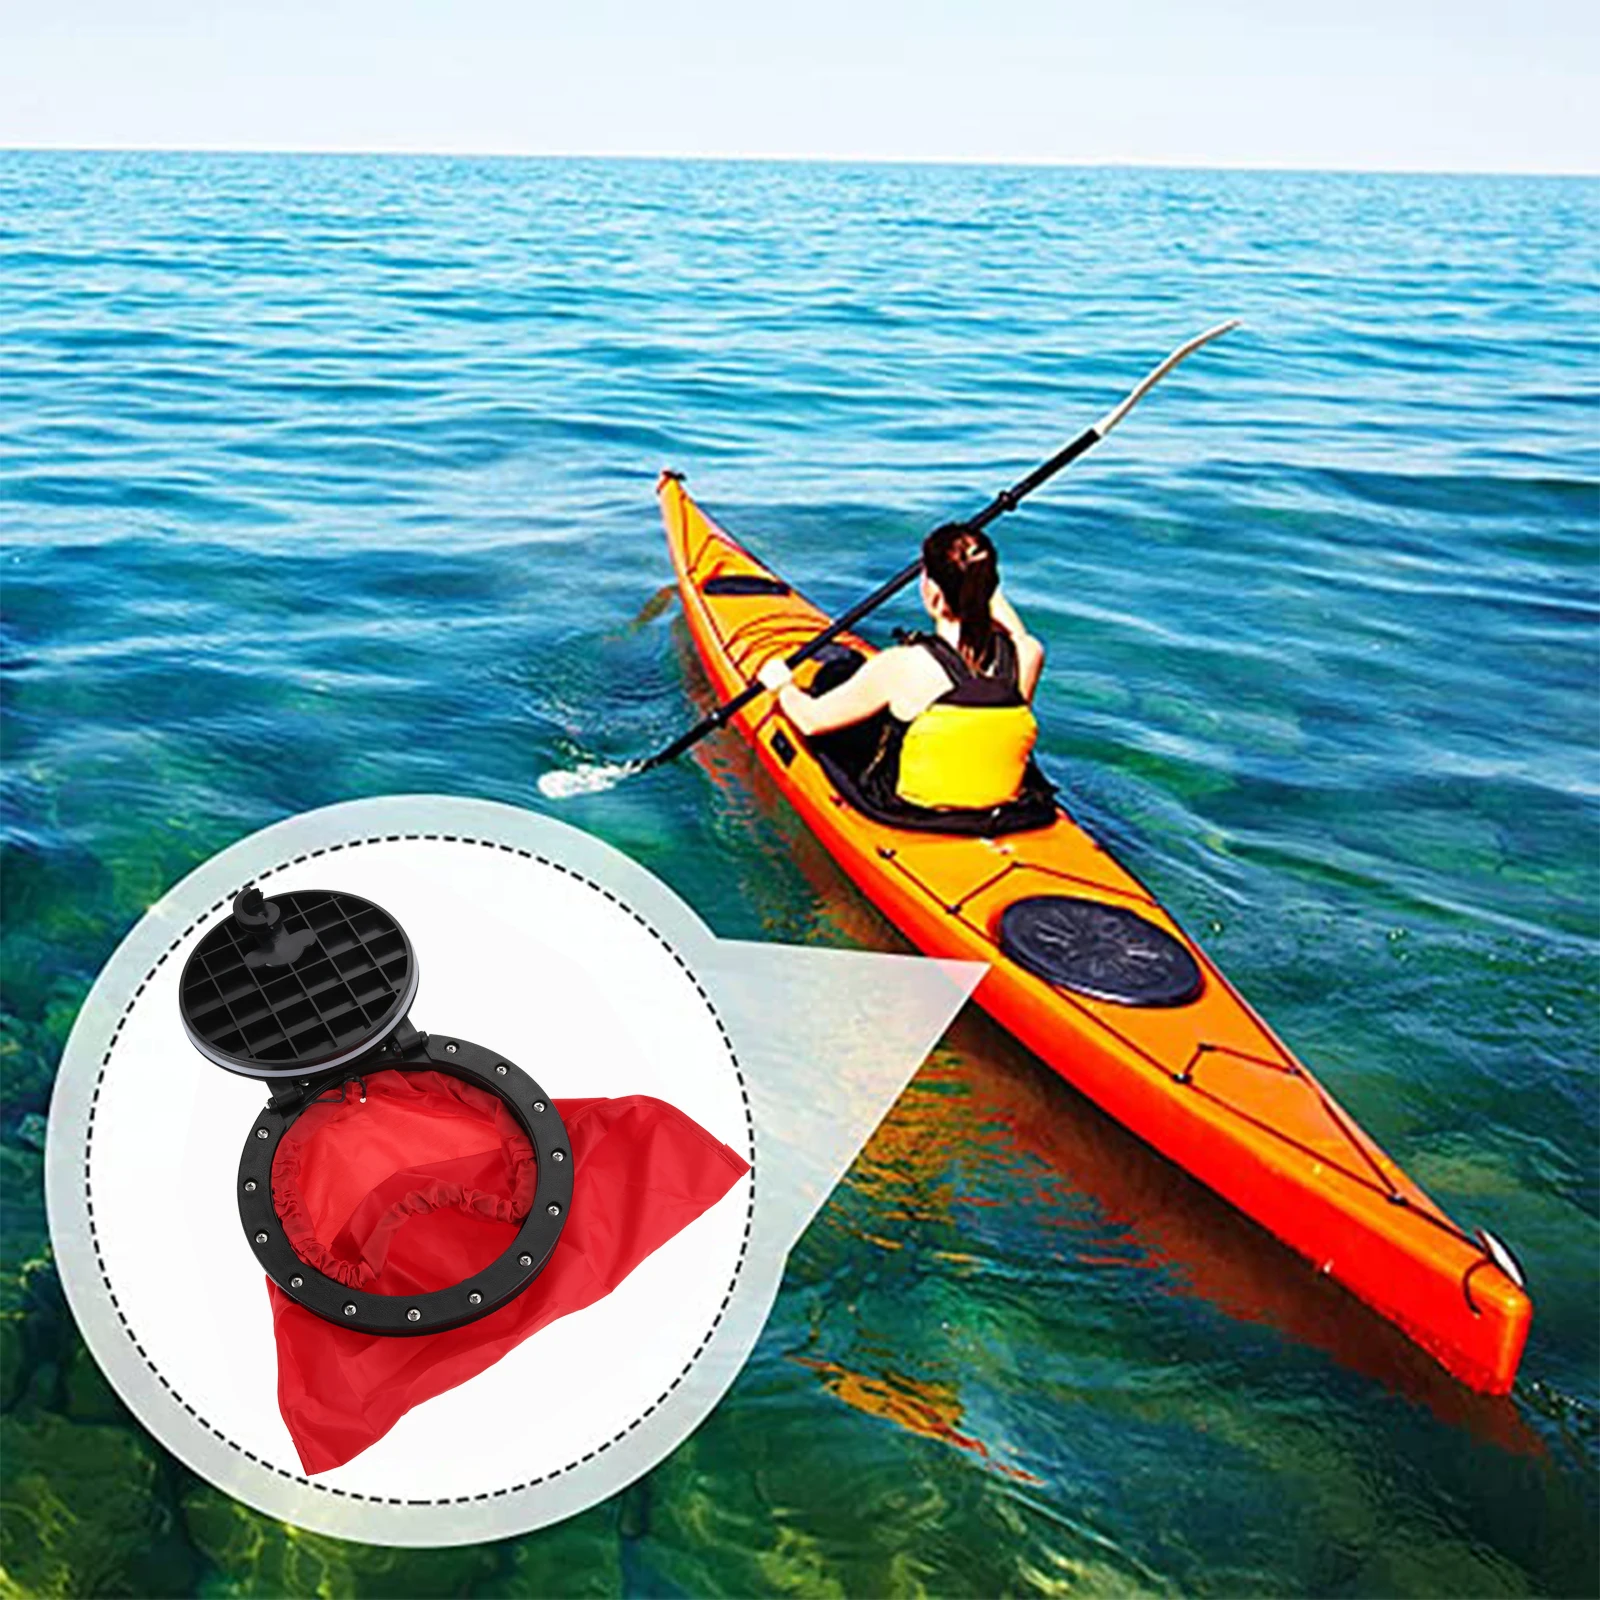 

1 Pc Deck Plate Hatch Cover Round PVC+ABS Reduce UV Damage with 16 Screws EVA Gasket Protect Waterproof Bag Boat Accessories